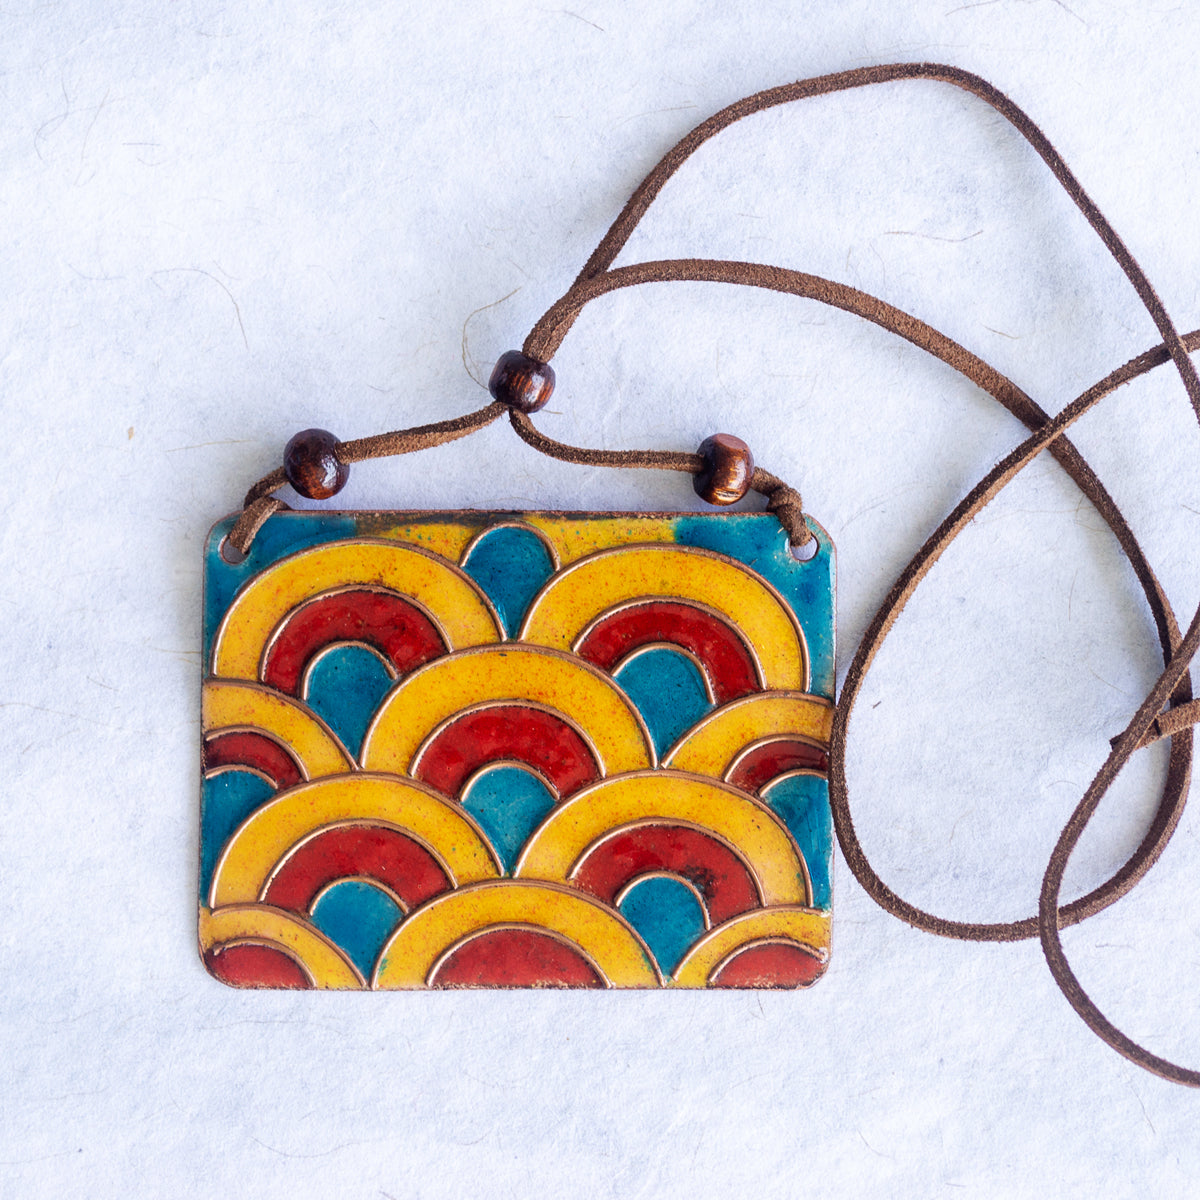 Retro Style Copper Enamel Pendent Necklace with Faux Leather String and Wooden Beads by Ekibeki